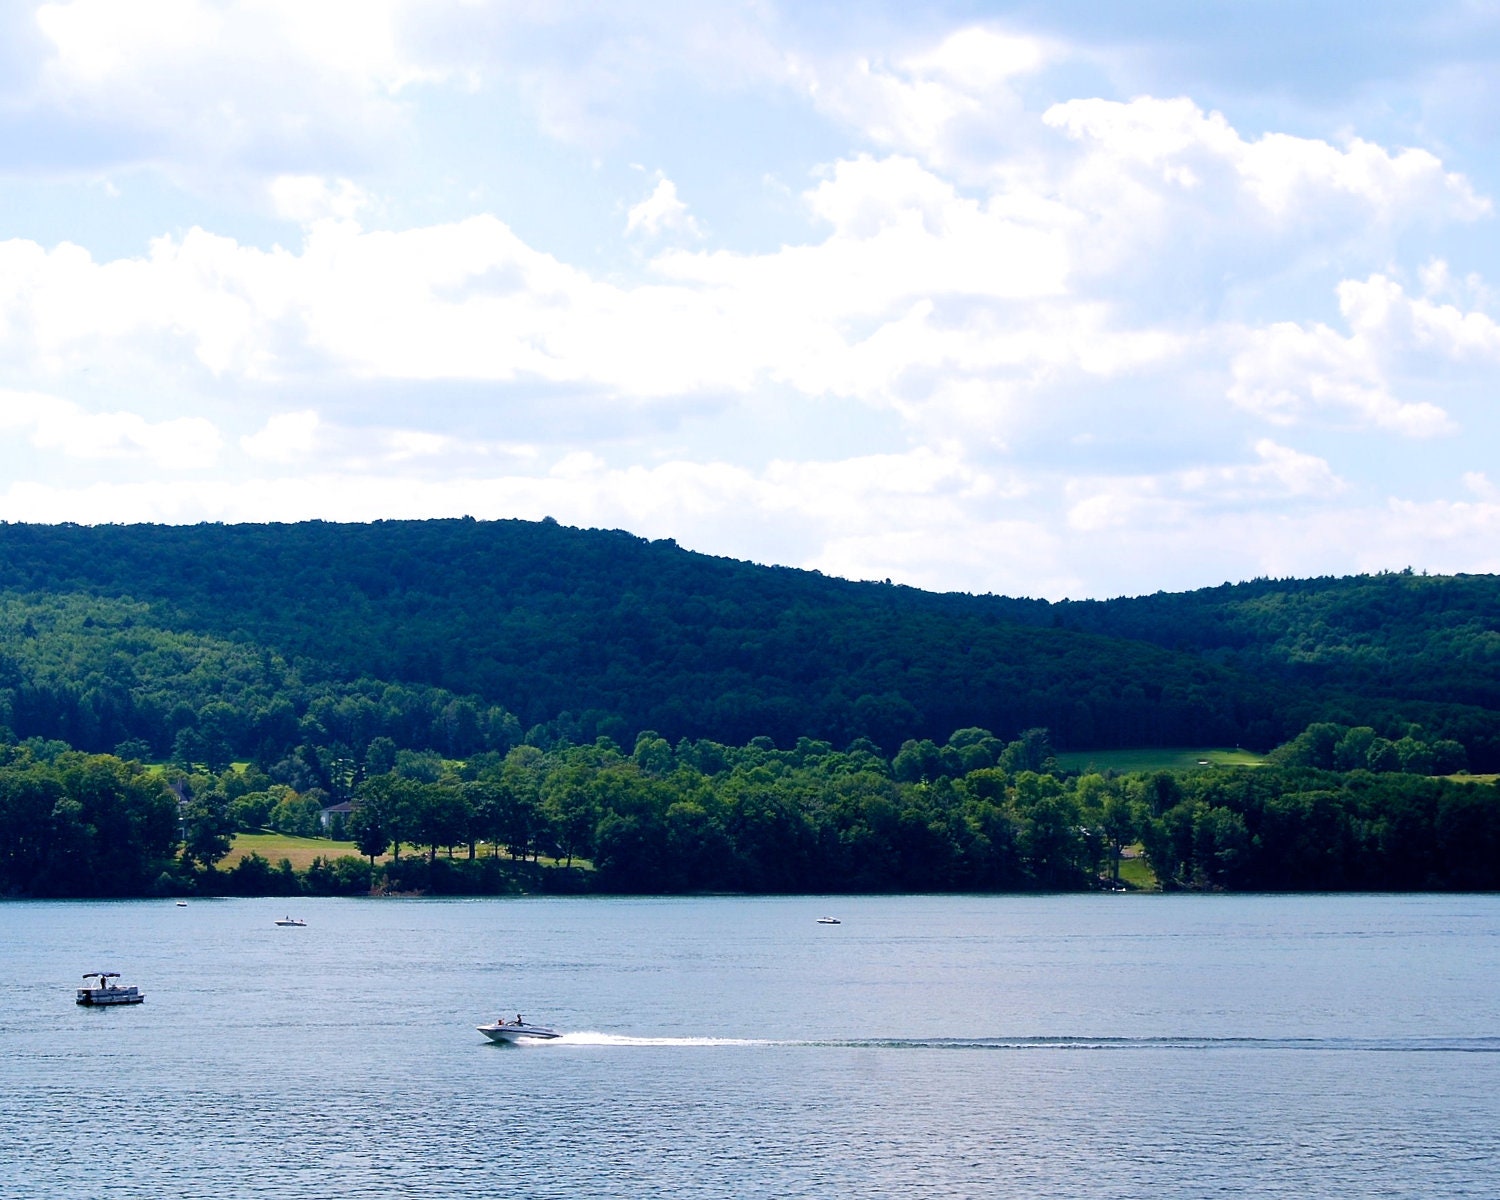 Nature Photography -Relaxing Blue Waters in New York State - Nautical, Summer, Lake, Travel Photography - PetitePastiche